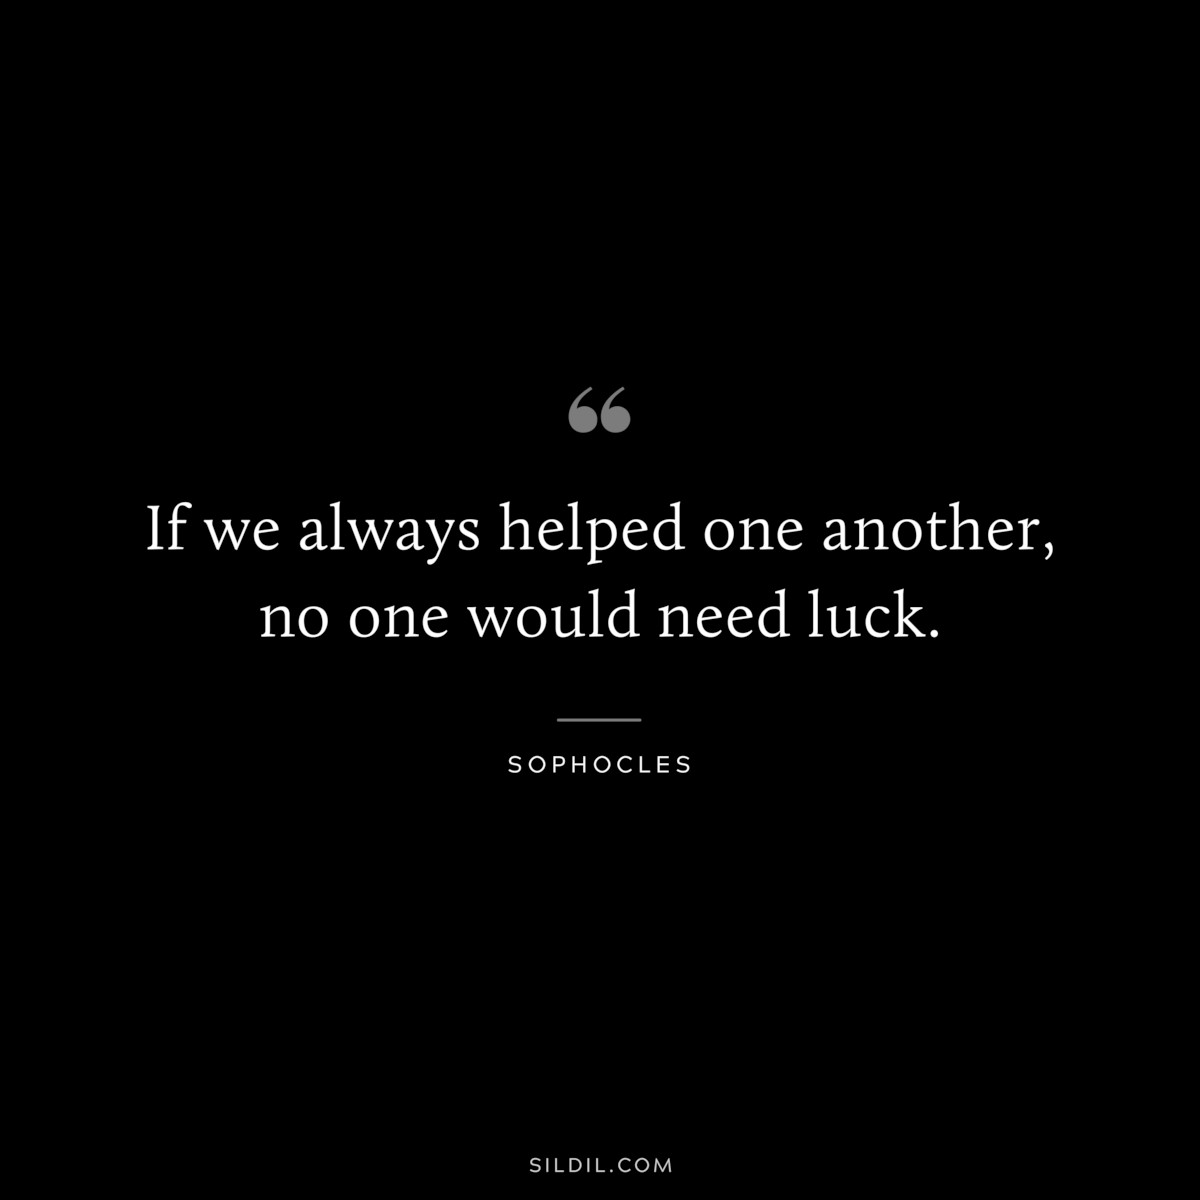 If we always helped one another, no one would need luck. ― Sophocles